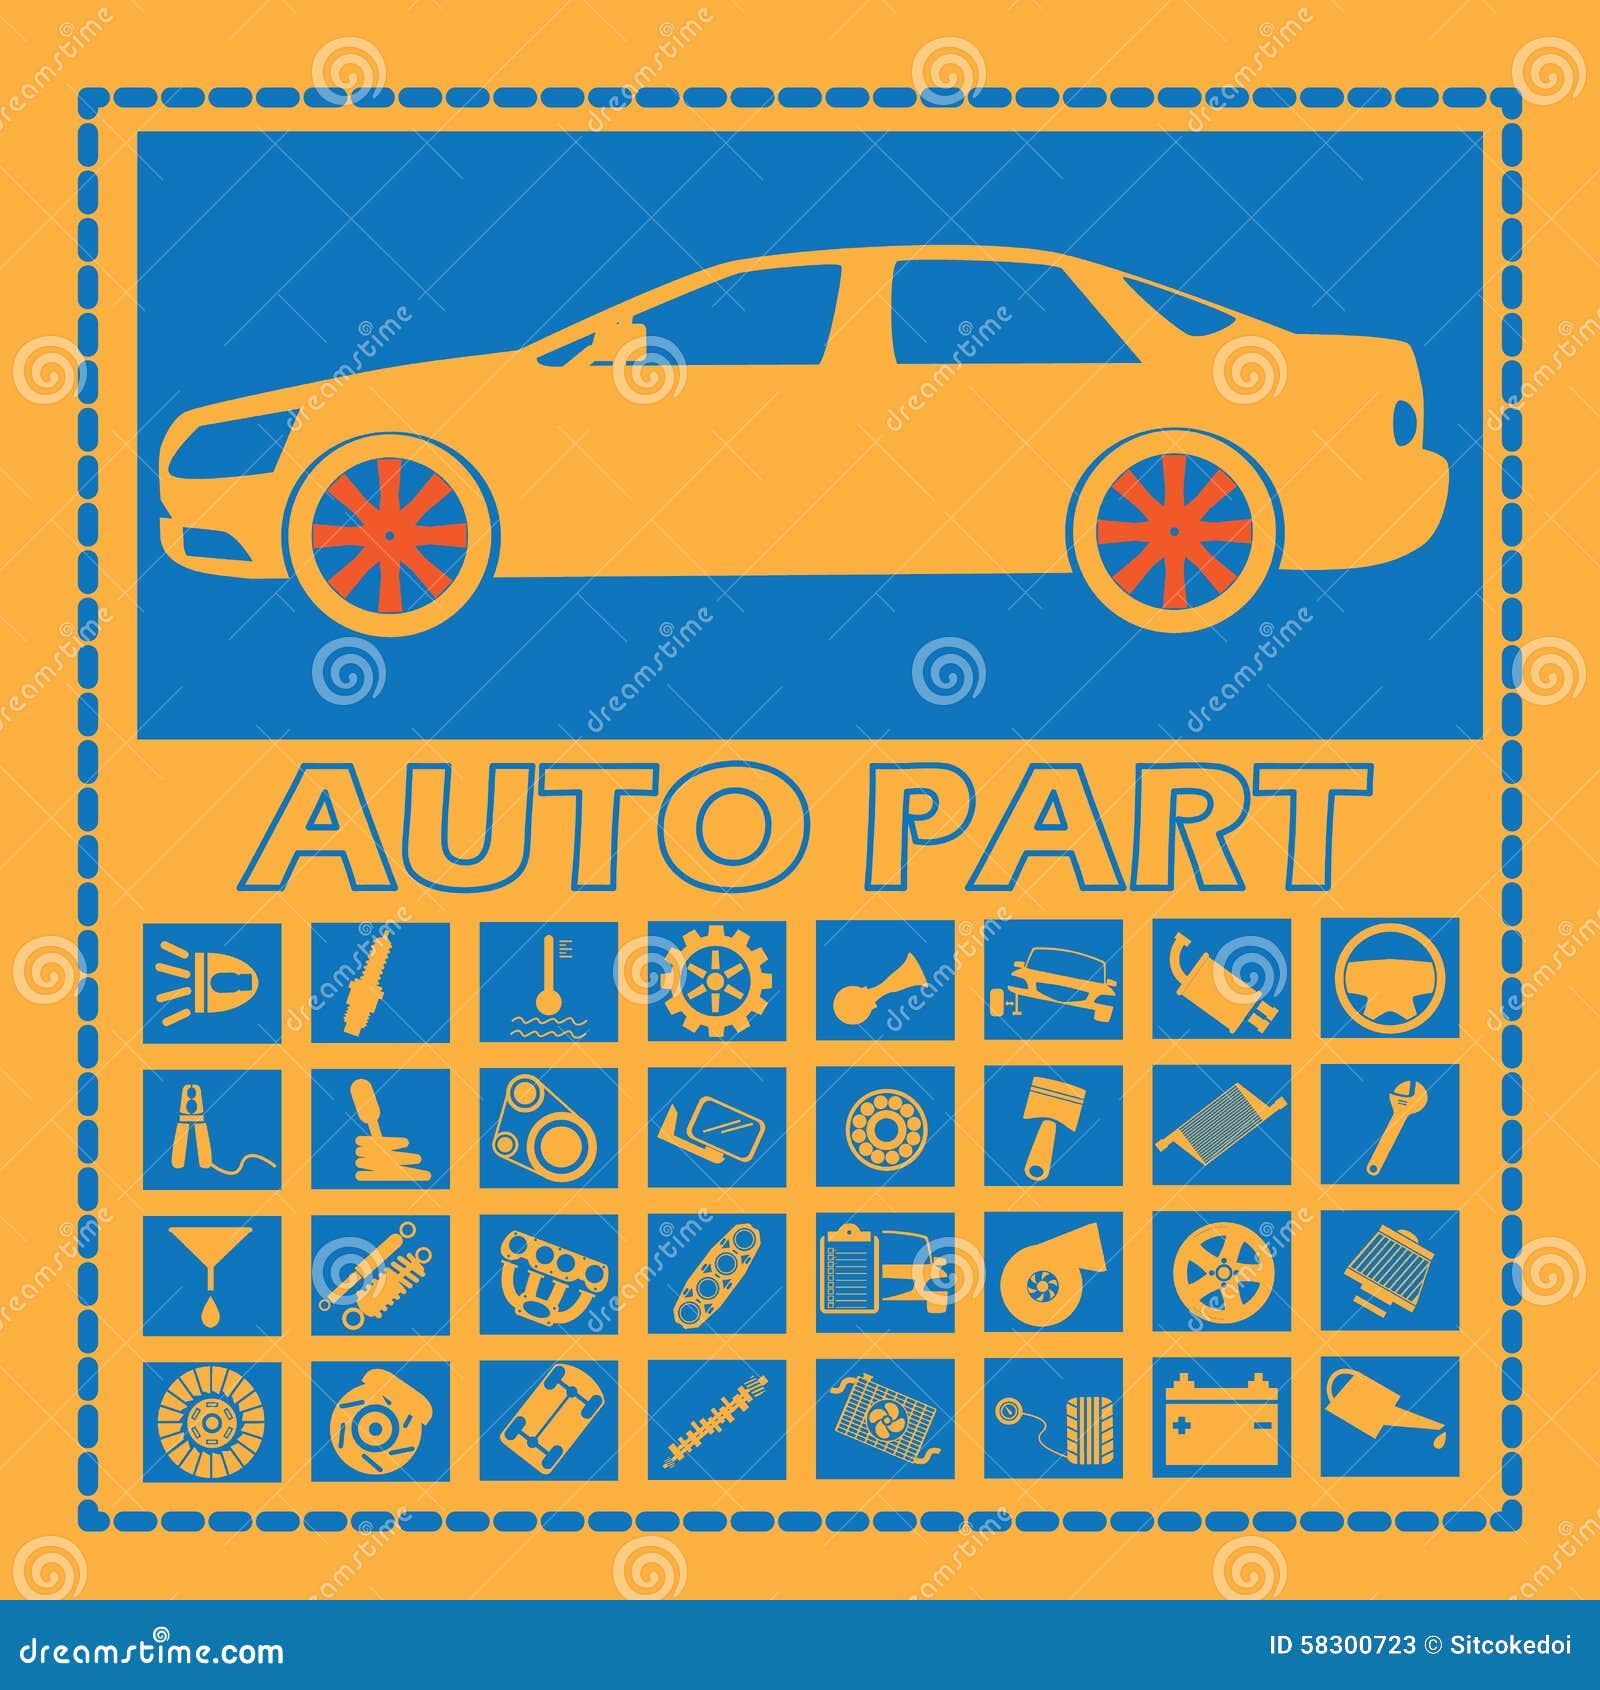 Car Part Icons On Blue Square Stock Vector - Image: 58300723